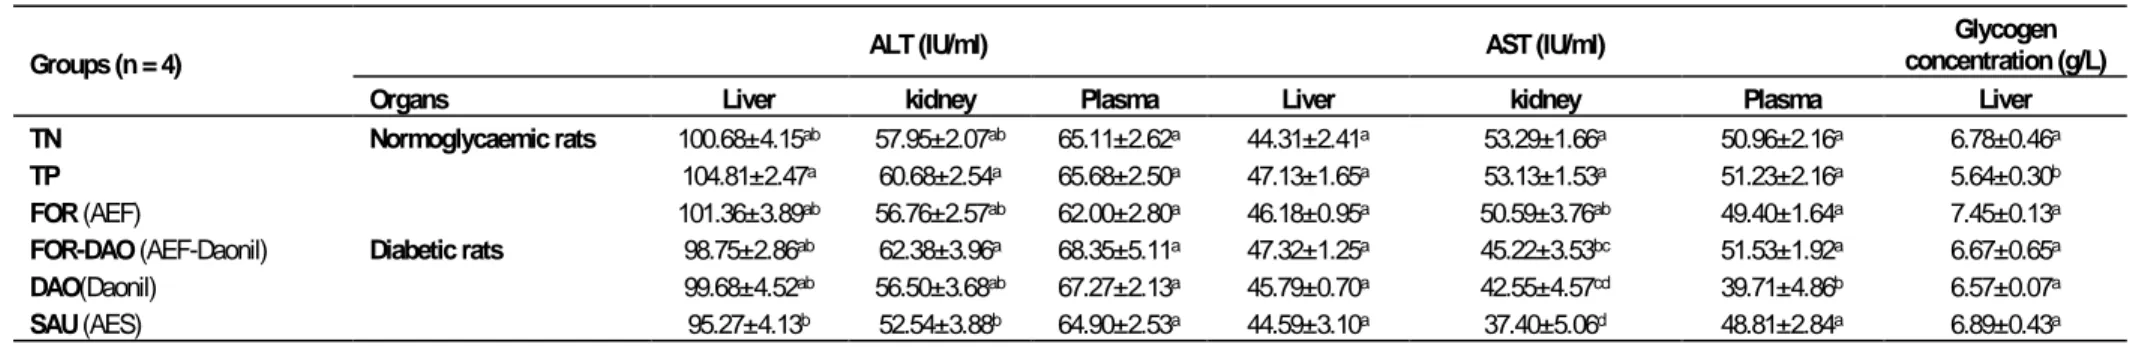 Table 5. Effects of the oral administration of AEF on the average transaminases activities and the glycogen hepatic concentration